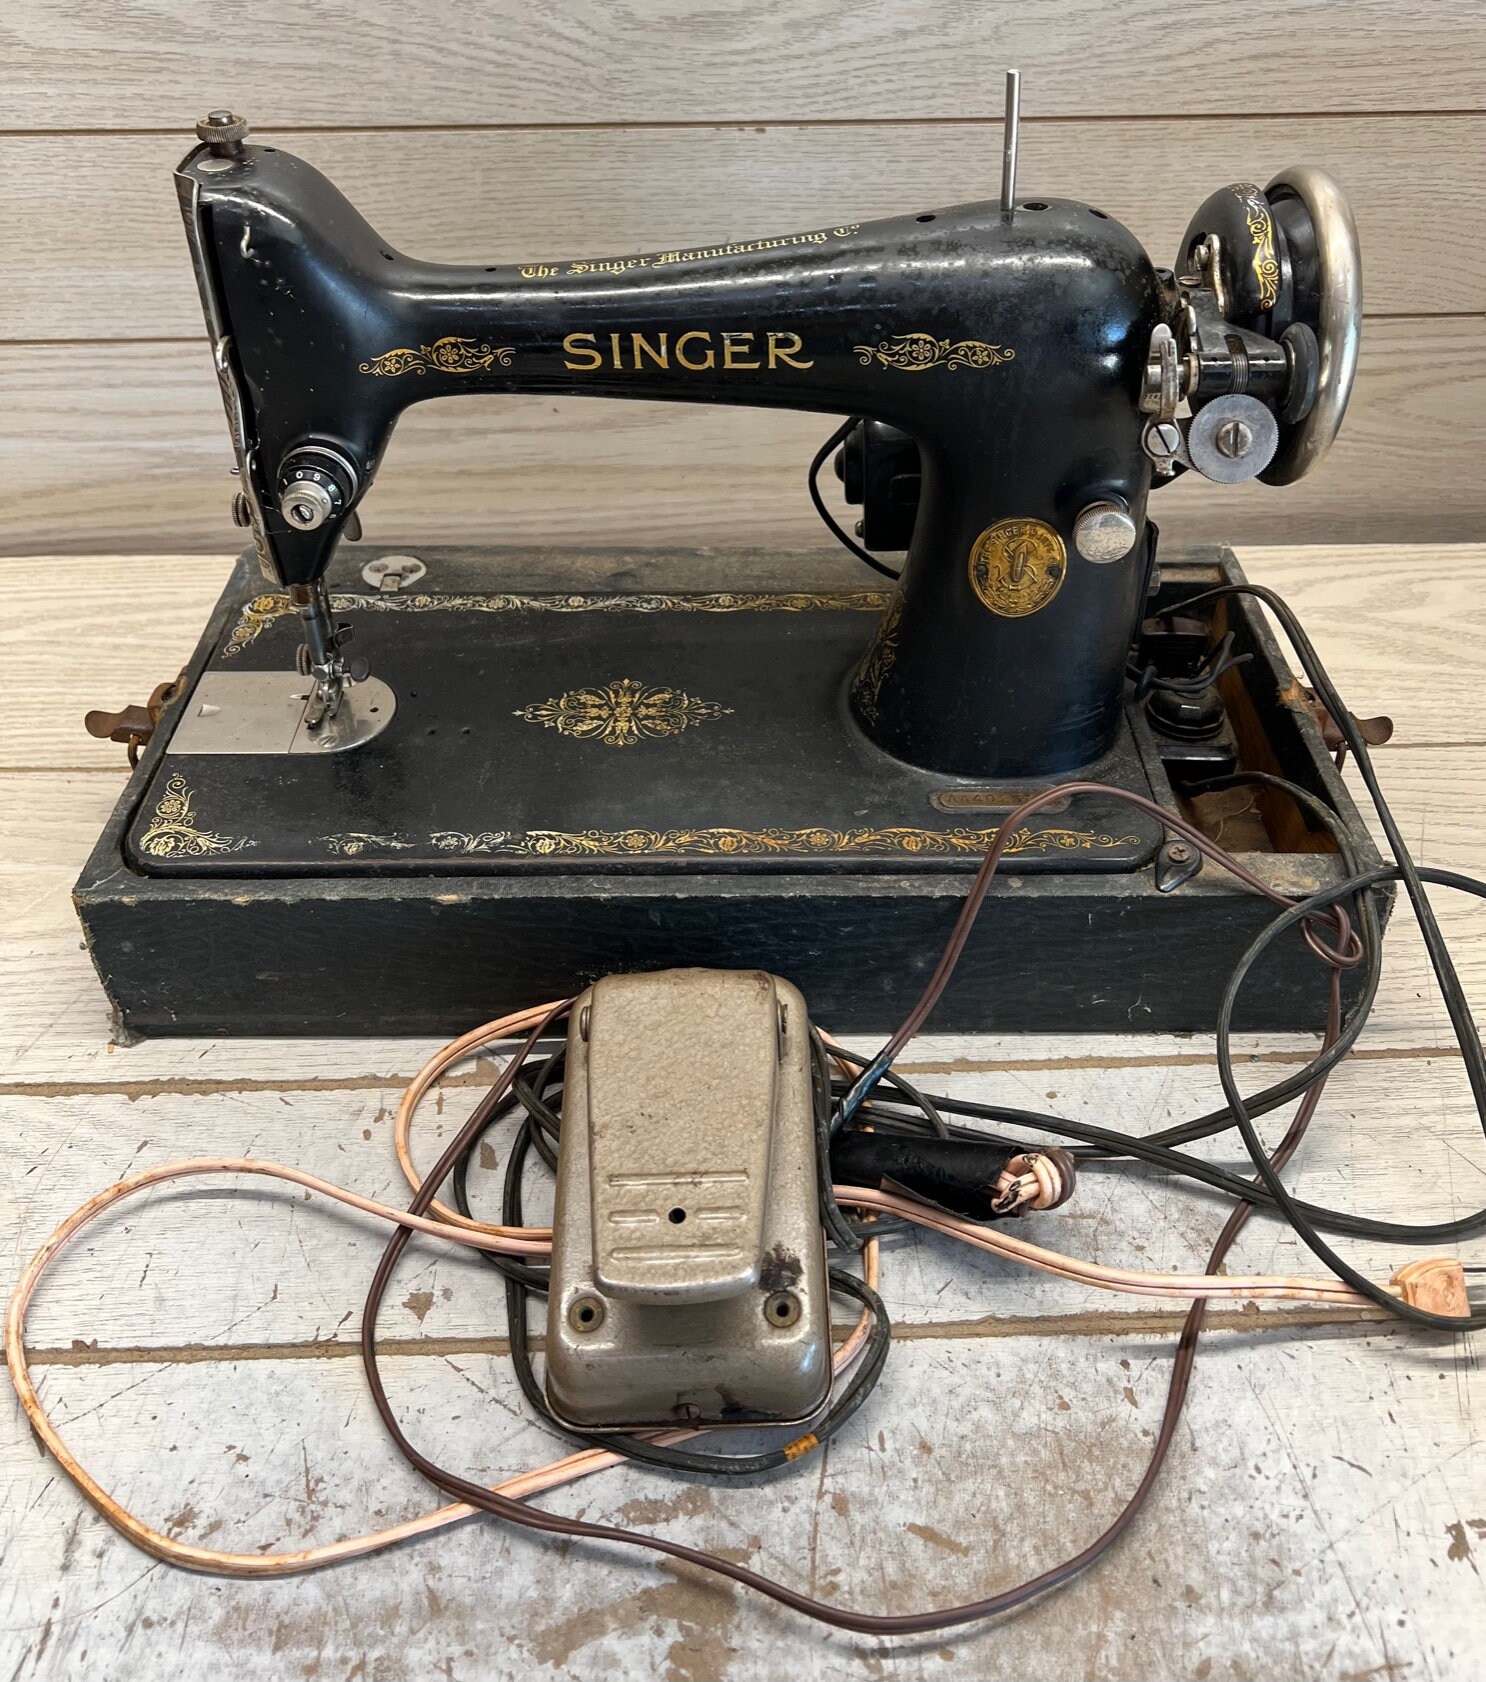 NEW Best Price SINGER Heavy Duty 4452 Sewing Machine With 32 Built